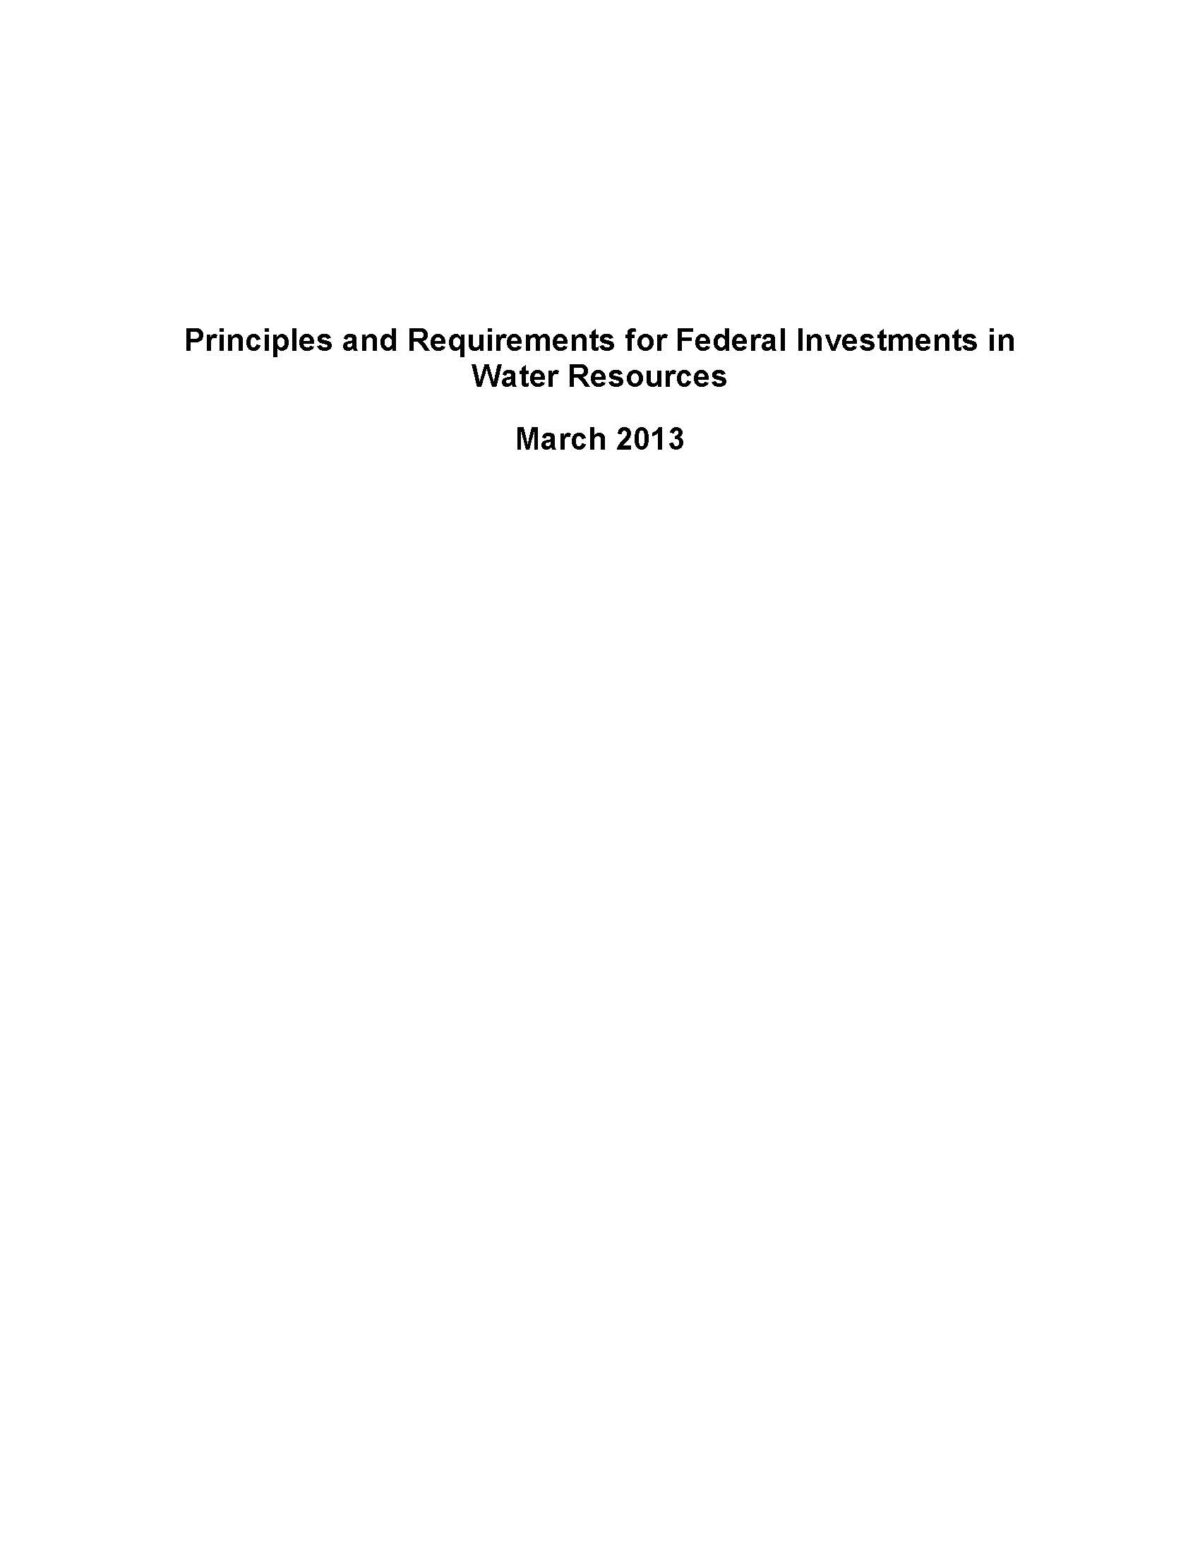 Principles and Requirements for Federal Investments in Water Resources